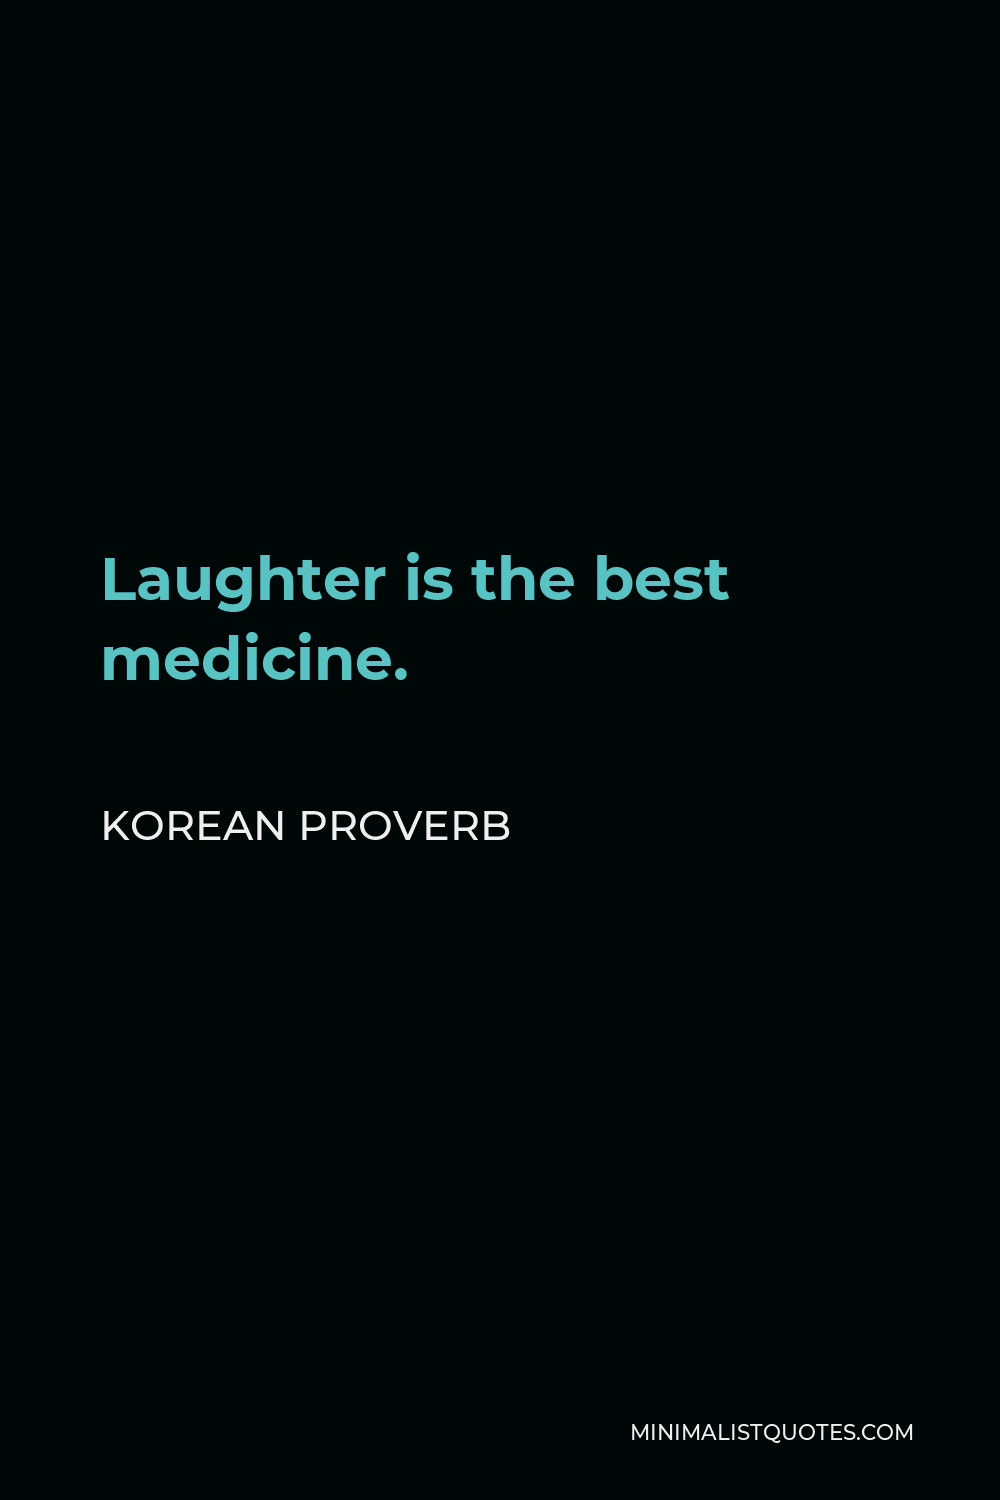 Korean Proverb Quote - Laughter is the best medicine.